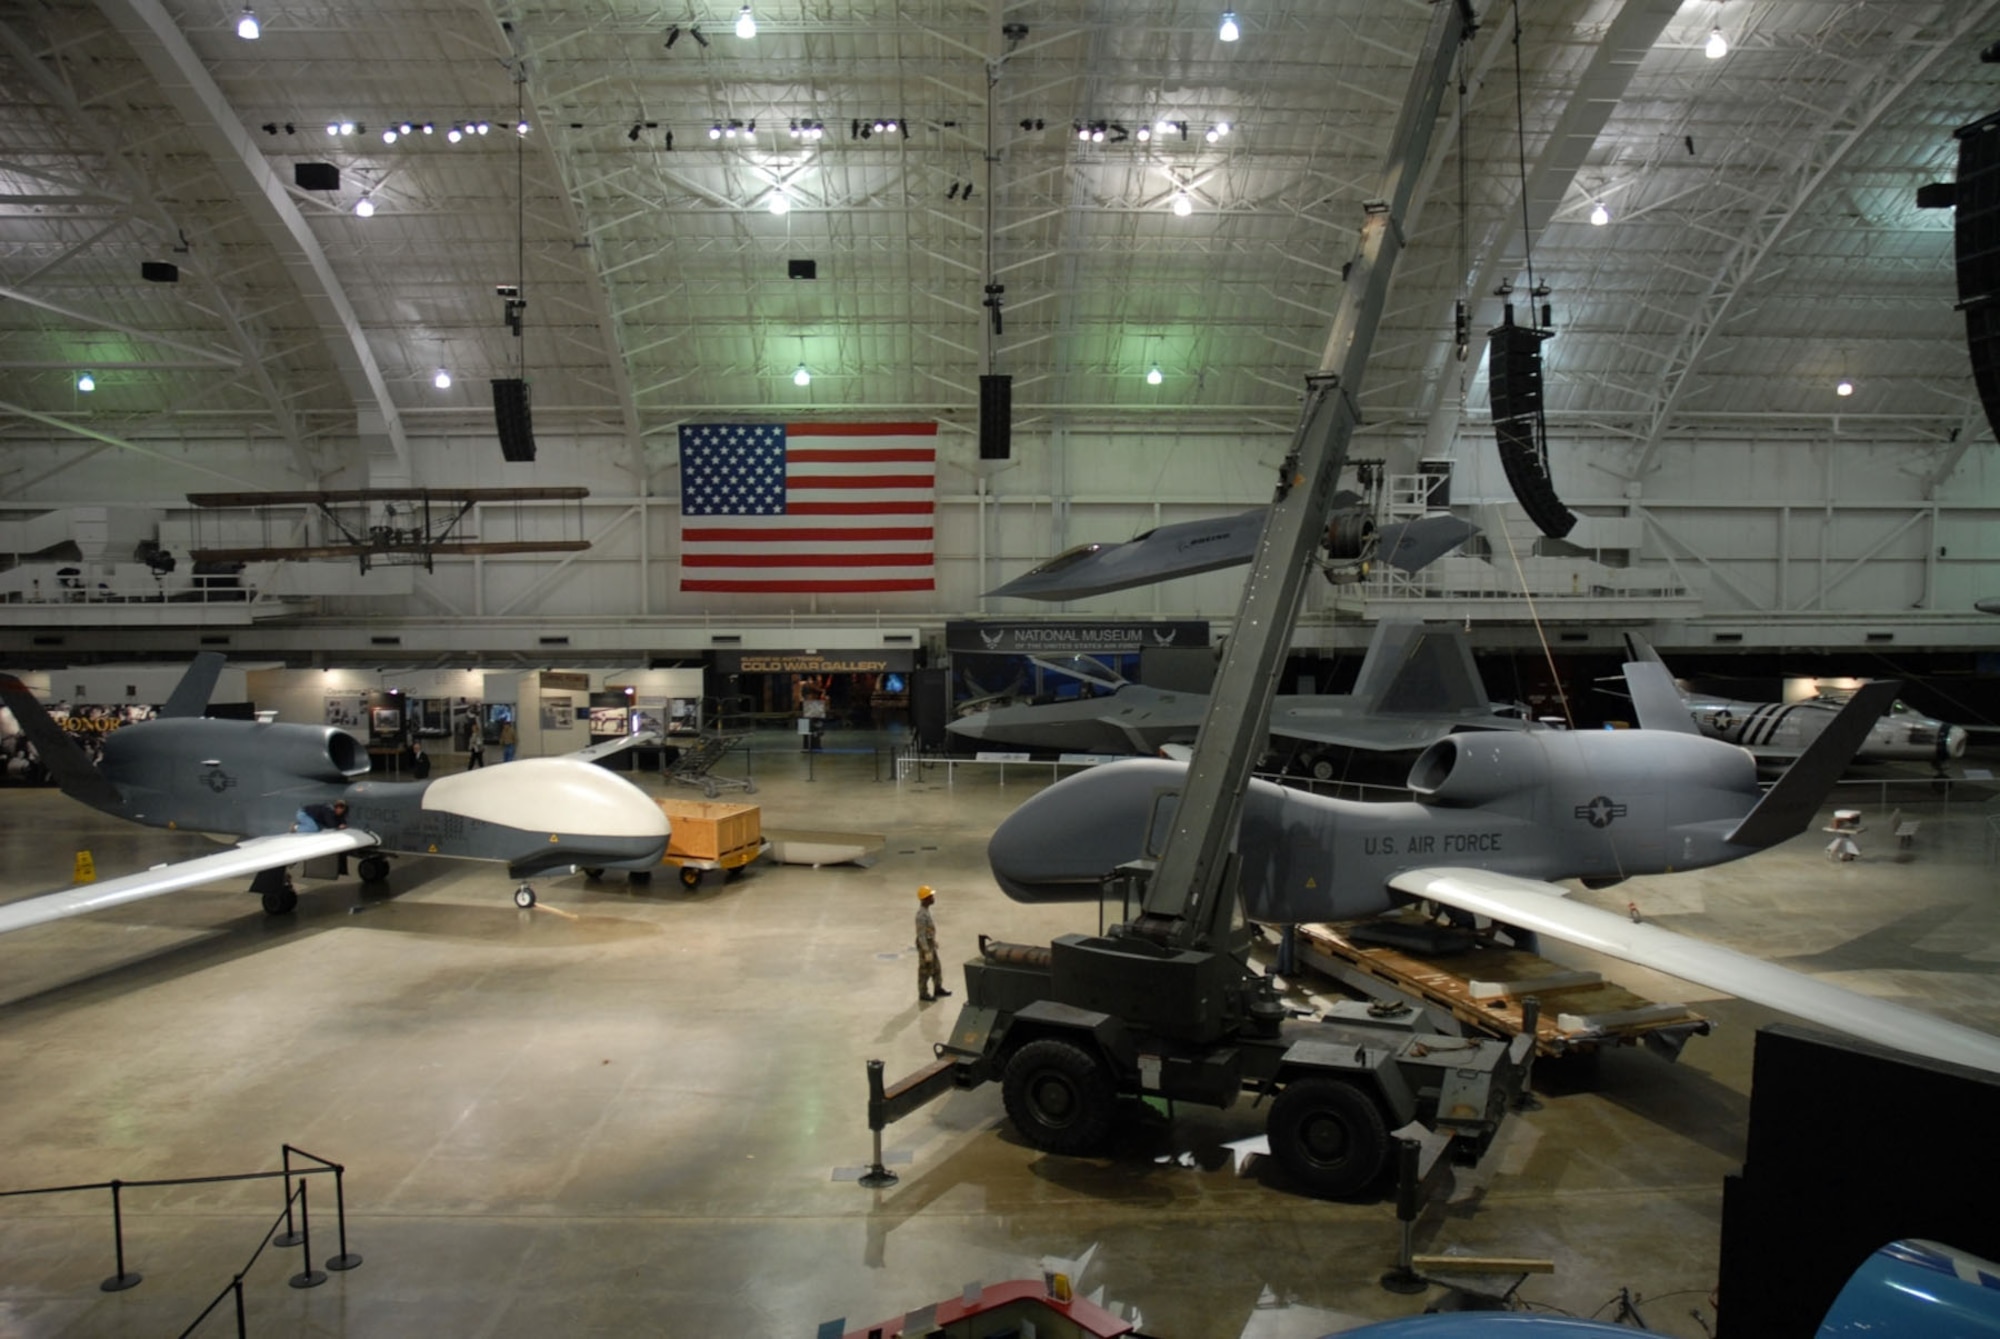 DAYTON, Ohio (05/2008) -- Restoration crews prepare to replace a model of the Global Hawk (right) with the RQ-4 Global Hawk that has seen action in Operation Enduring Freedom (Afghanistan) and in several American and international joint forces exercises. (U.S. Air Force photo)